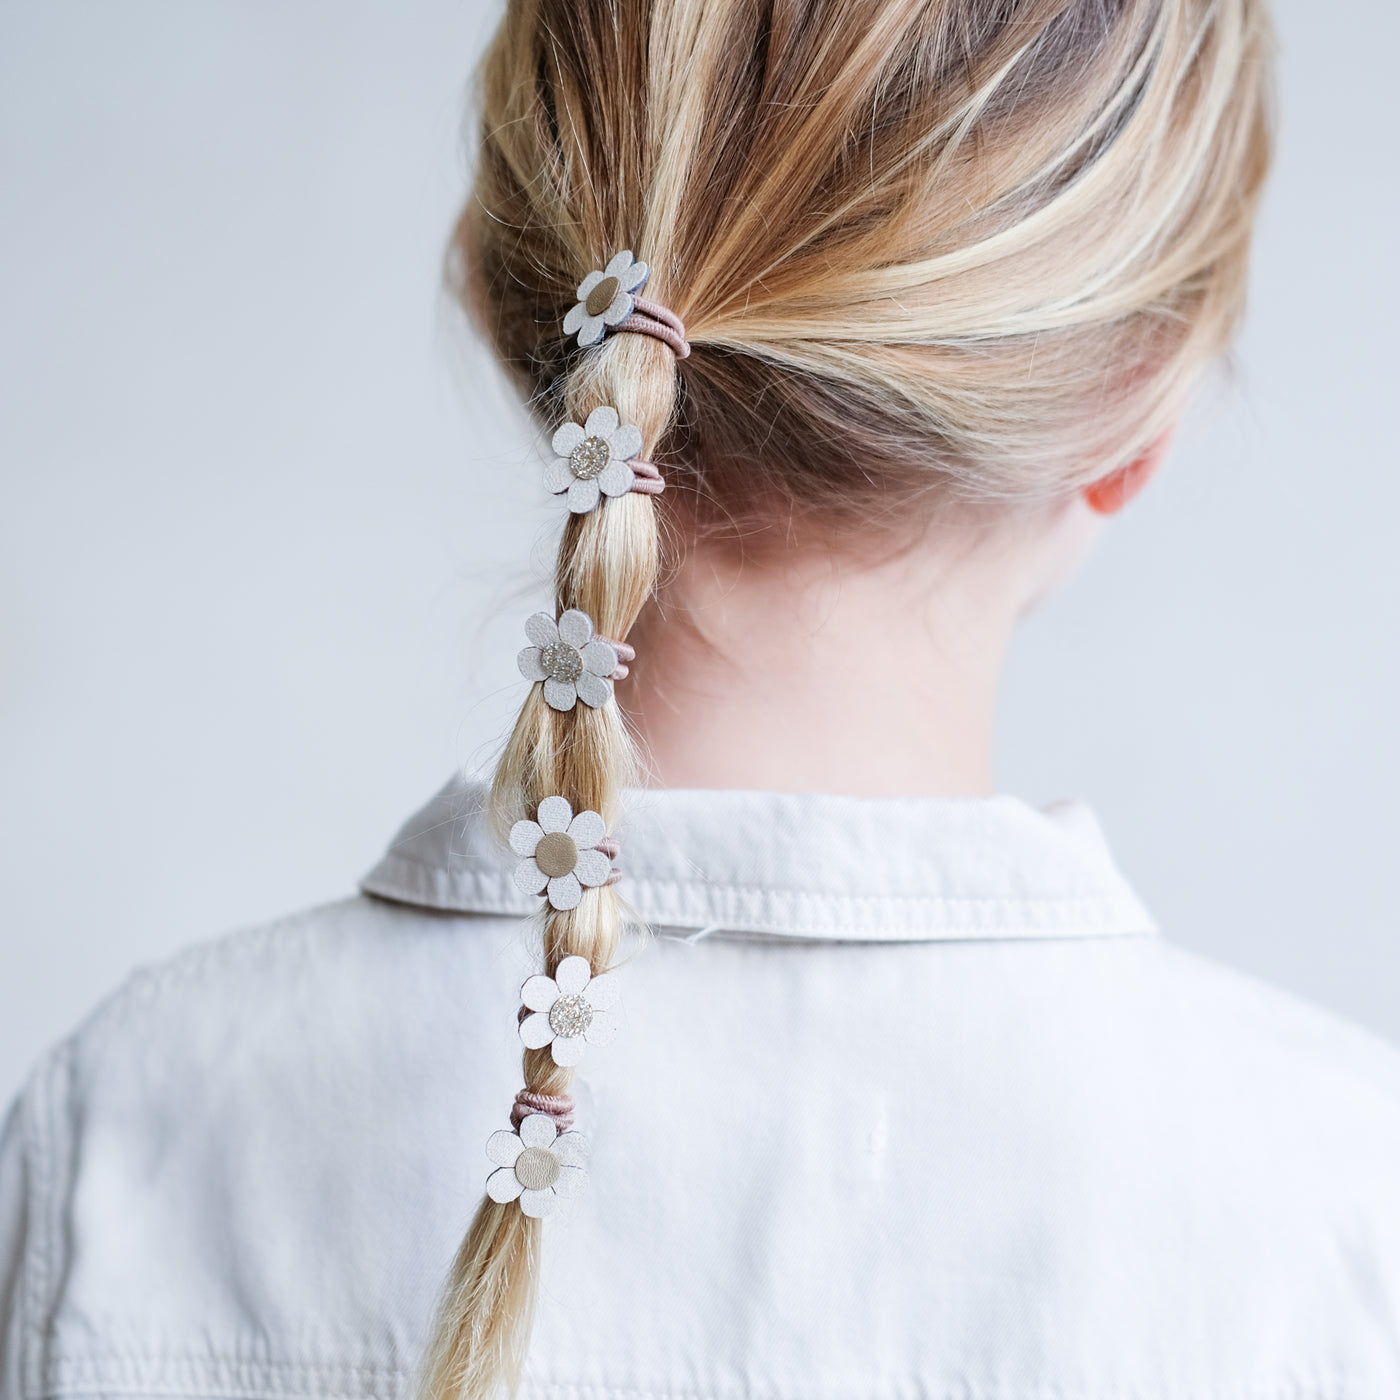 Mini cream daisy ponies worn in a ponytail hairstyle by little girl with fine blonde hair